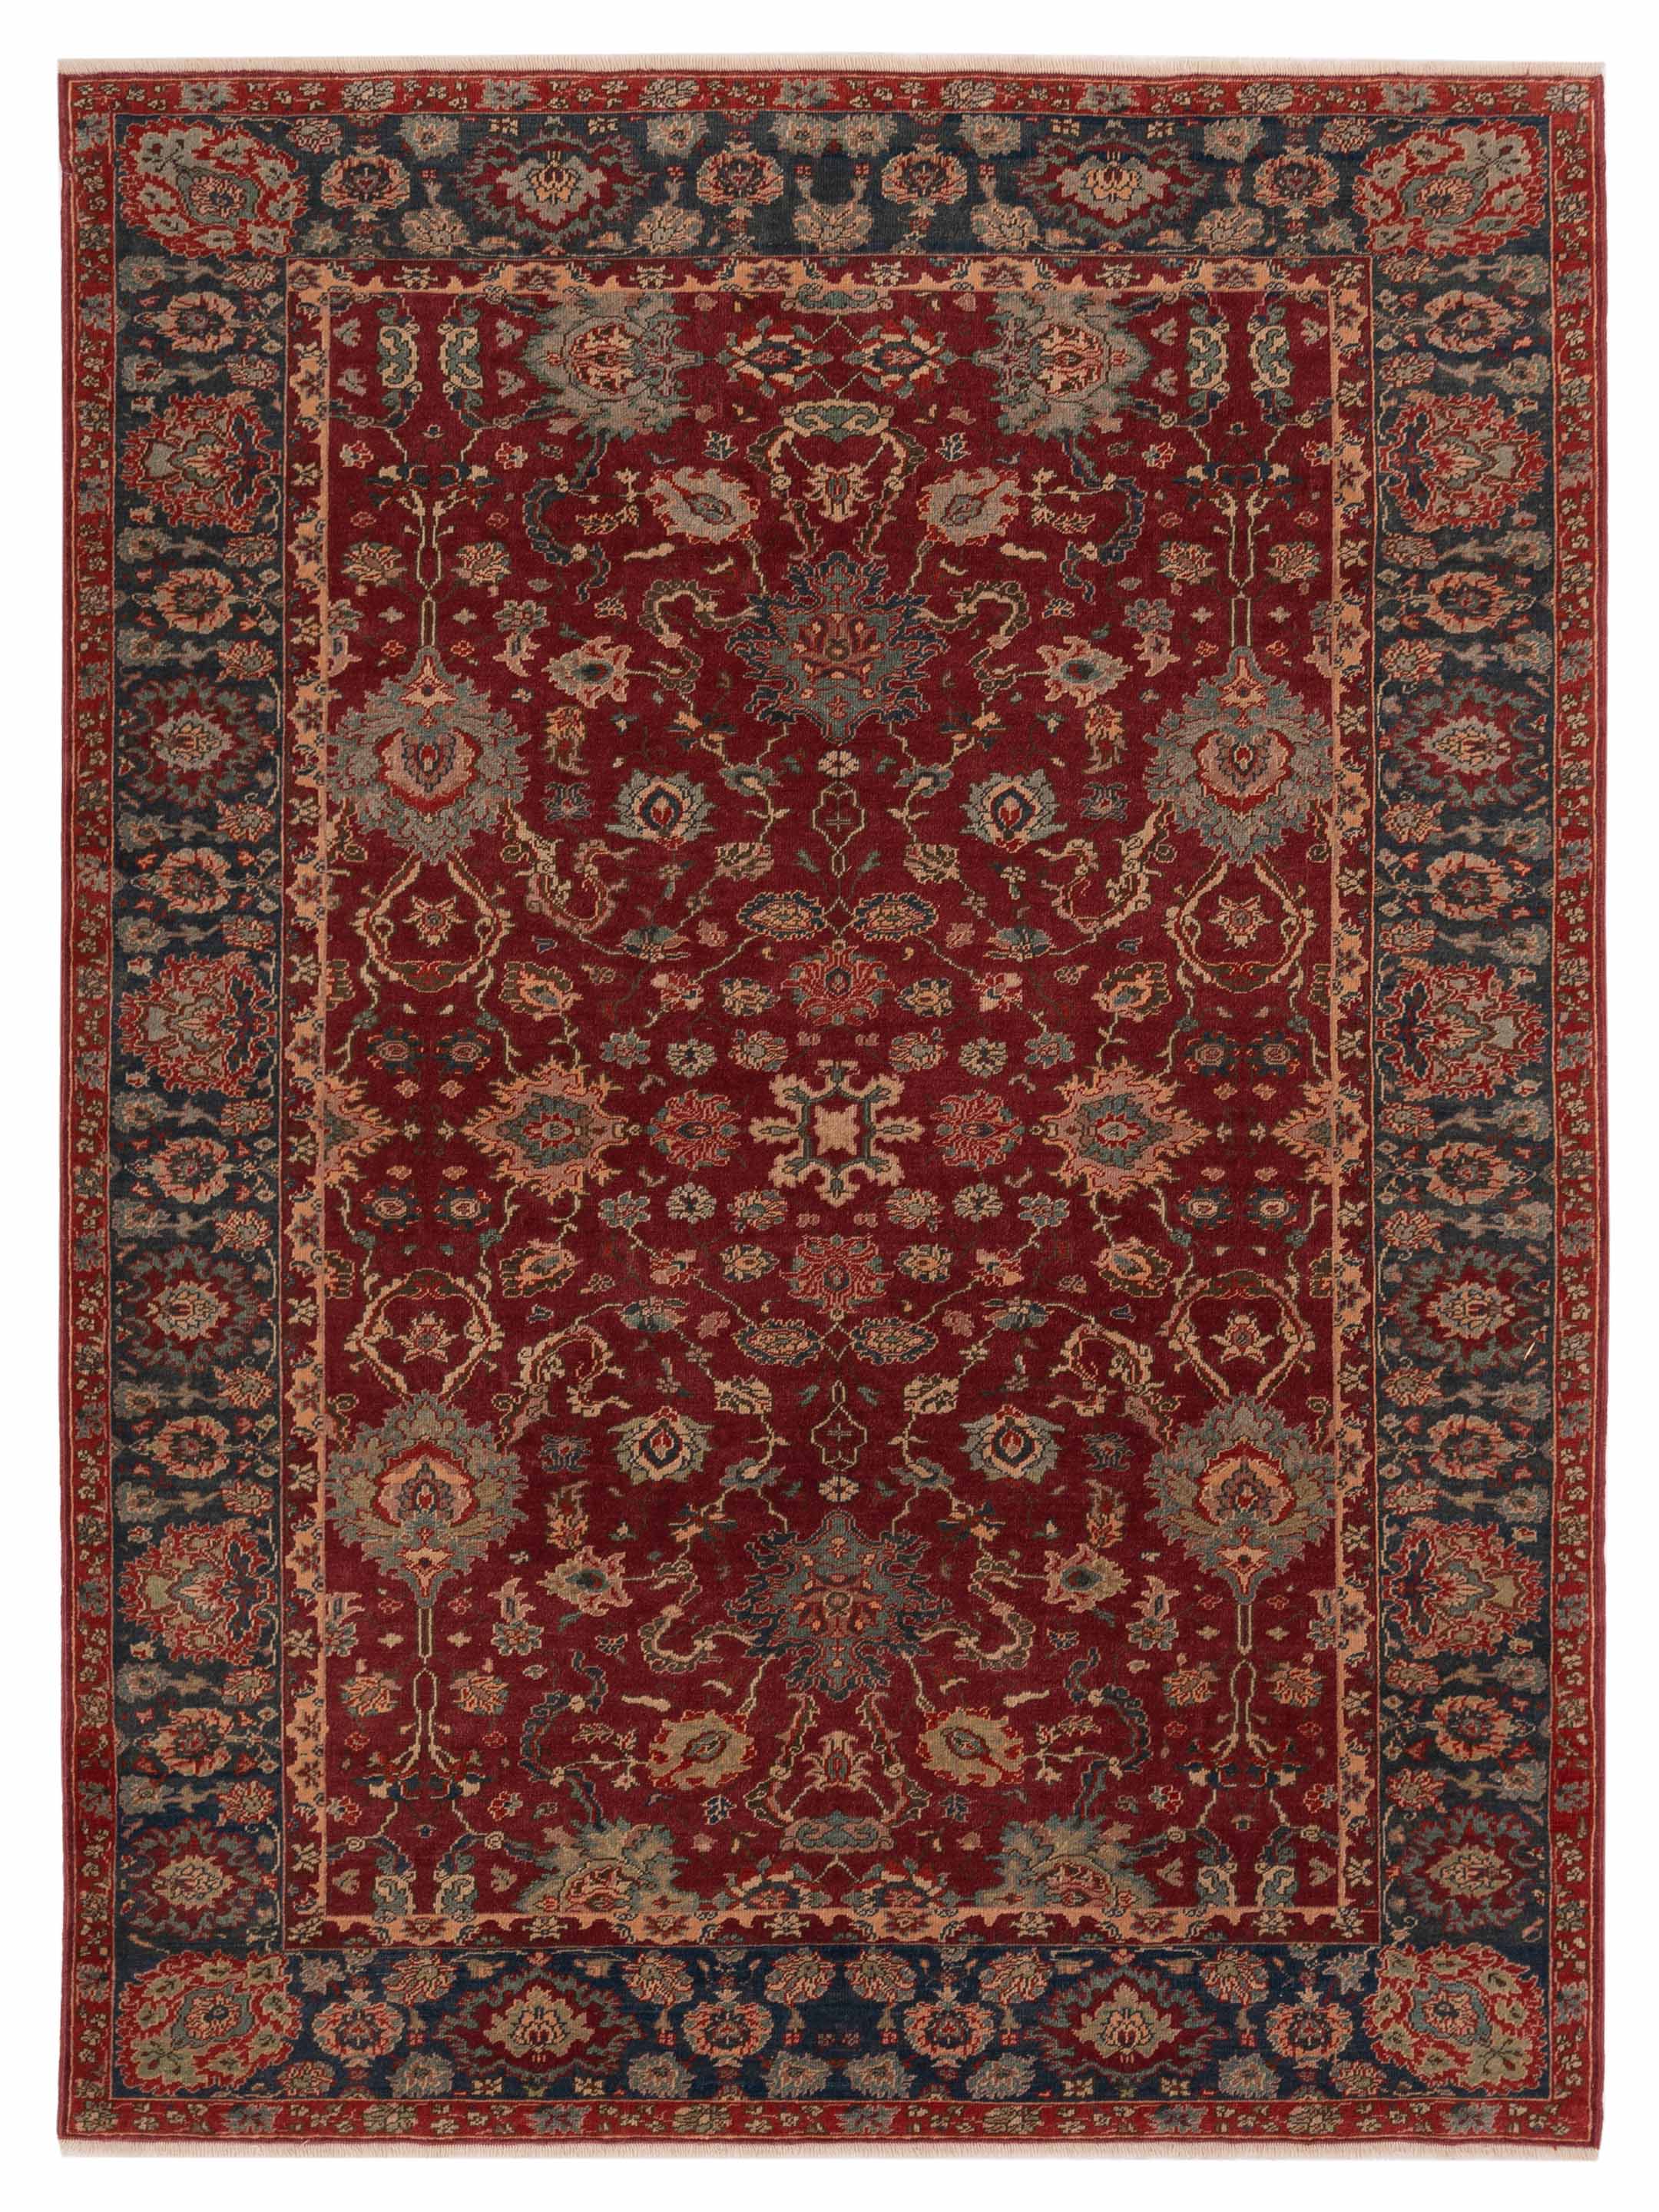 Antique Loom Traditional Red Steel Blue 6x9 Area Rug	